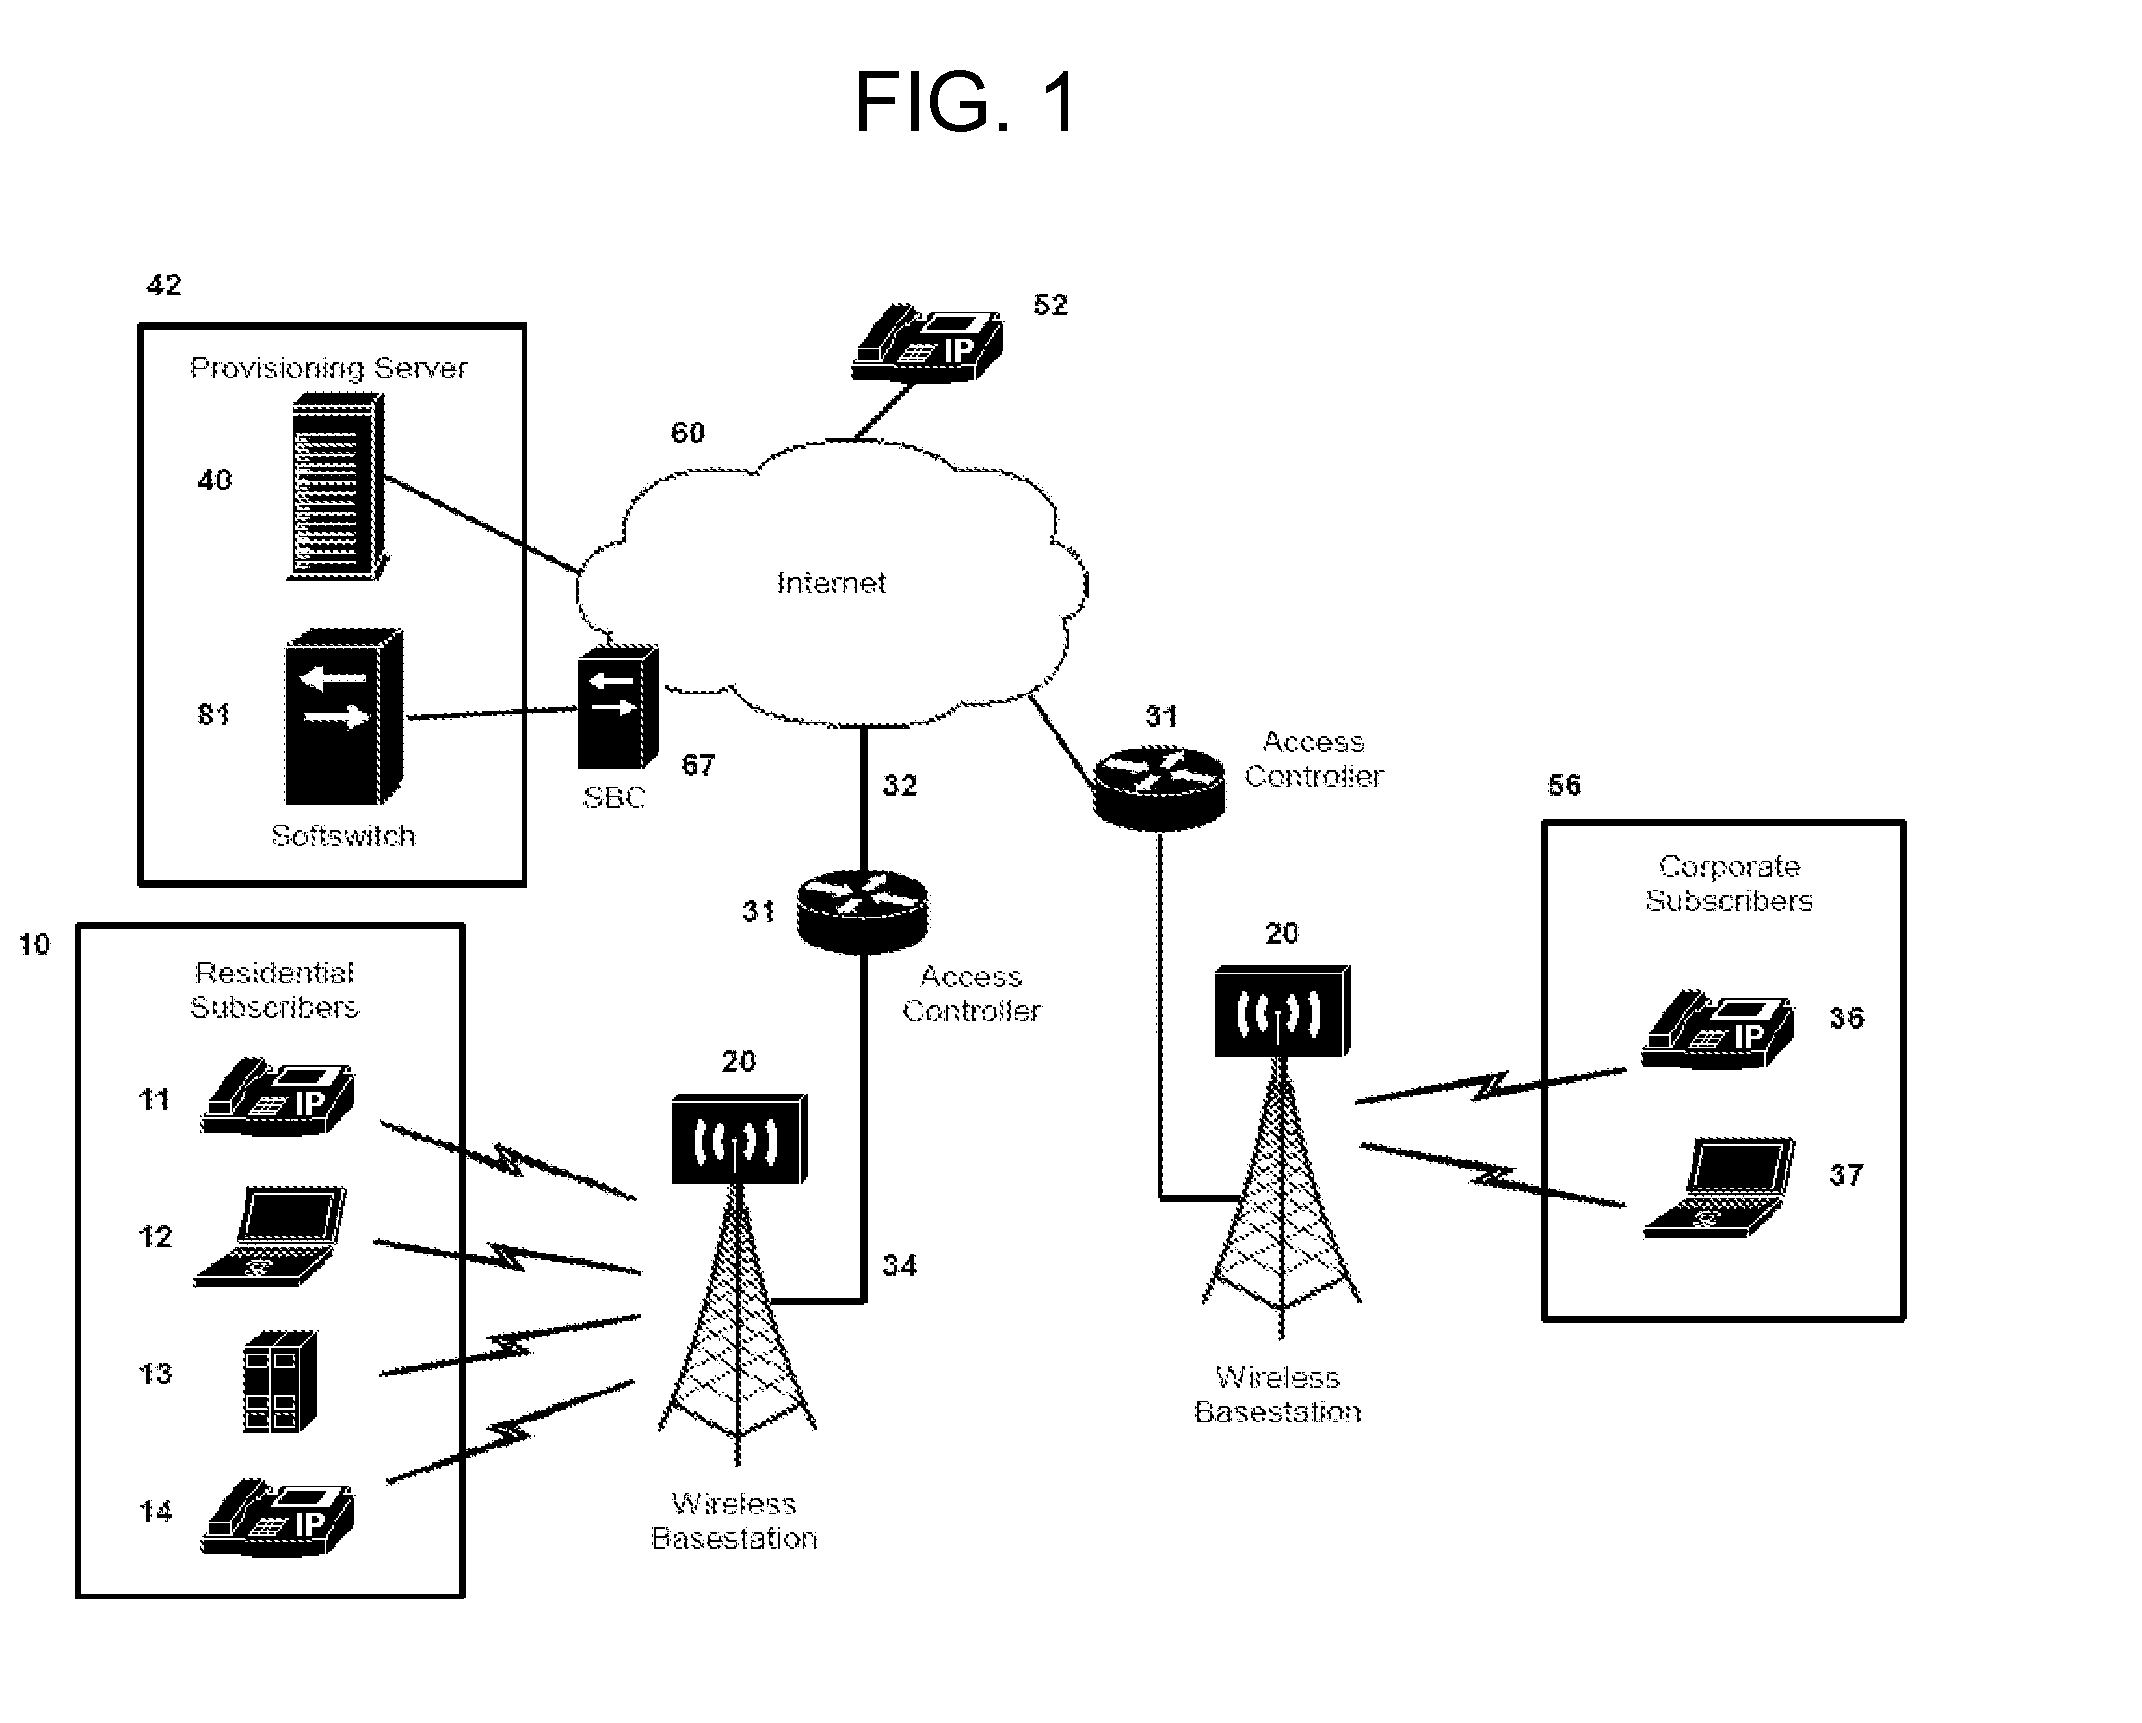 Methods, Systems, and Apparatus of Providing QoS and Scalability in the Deployment of Real-Time Traffic Services in Packet-based Networks